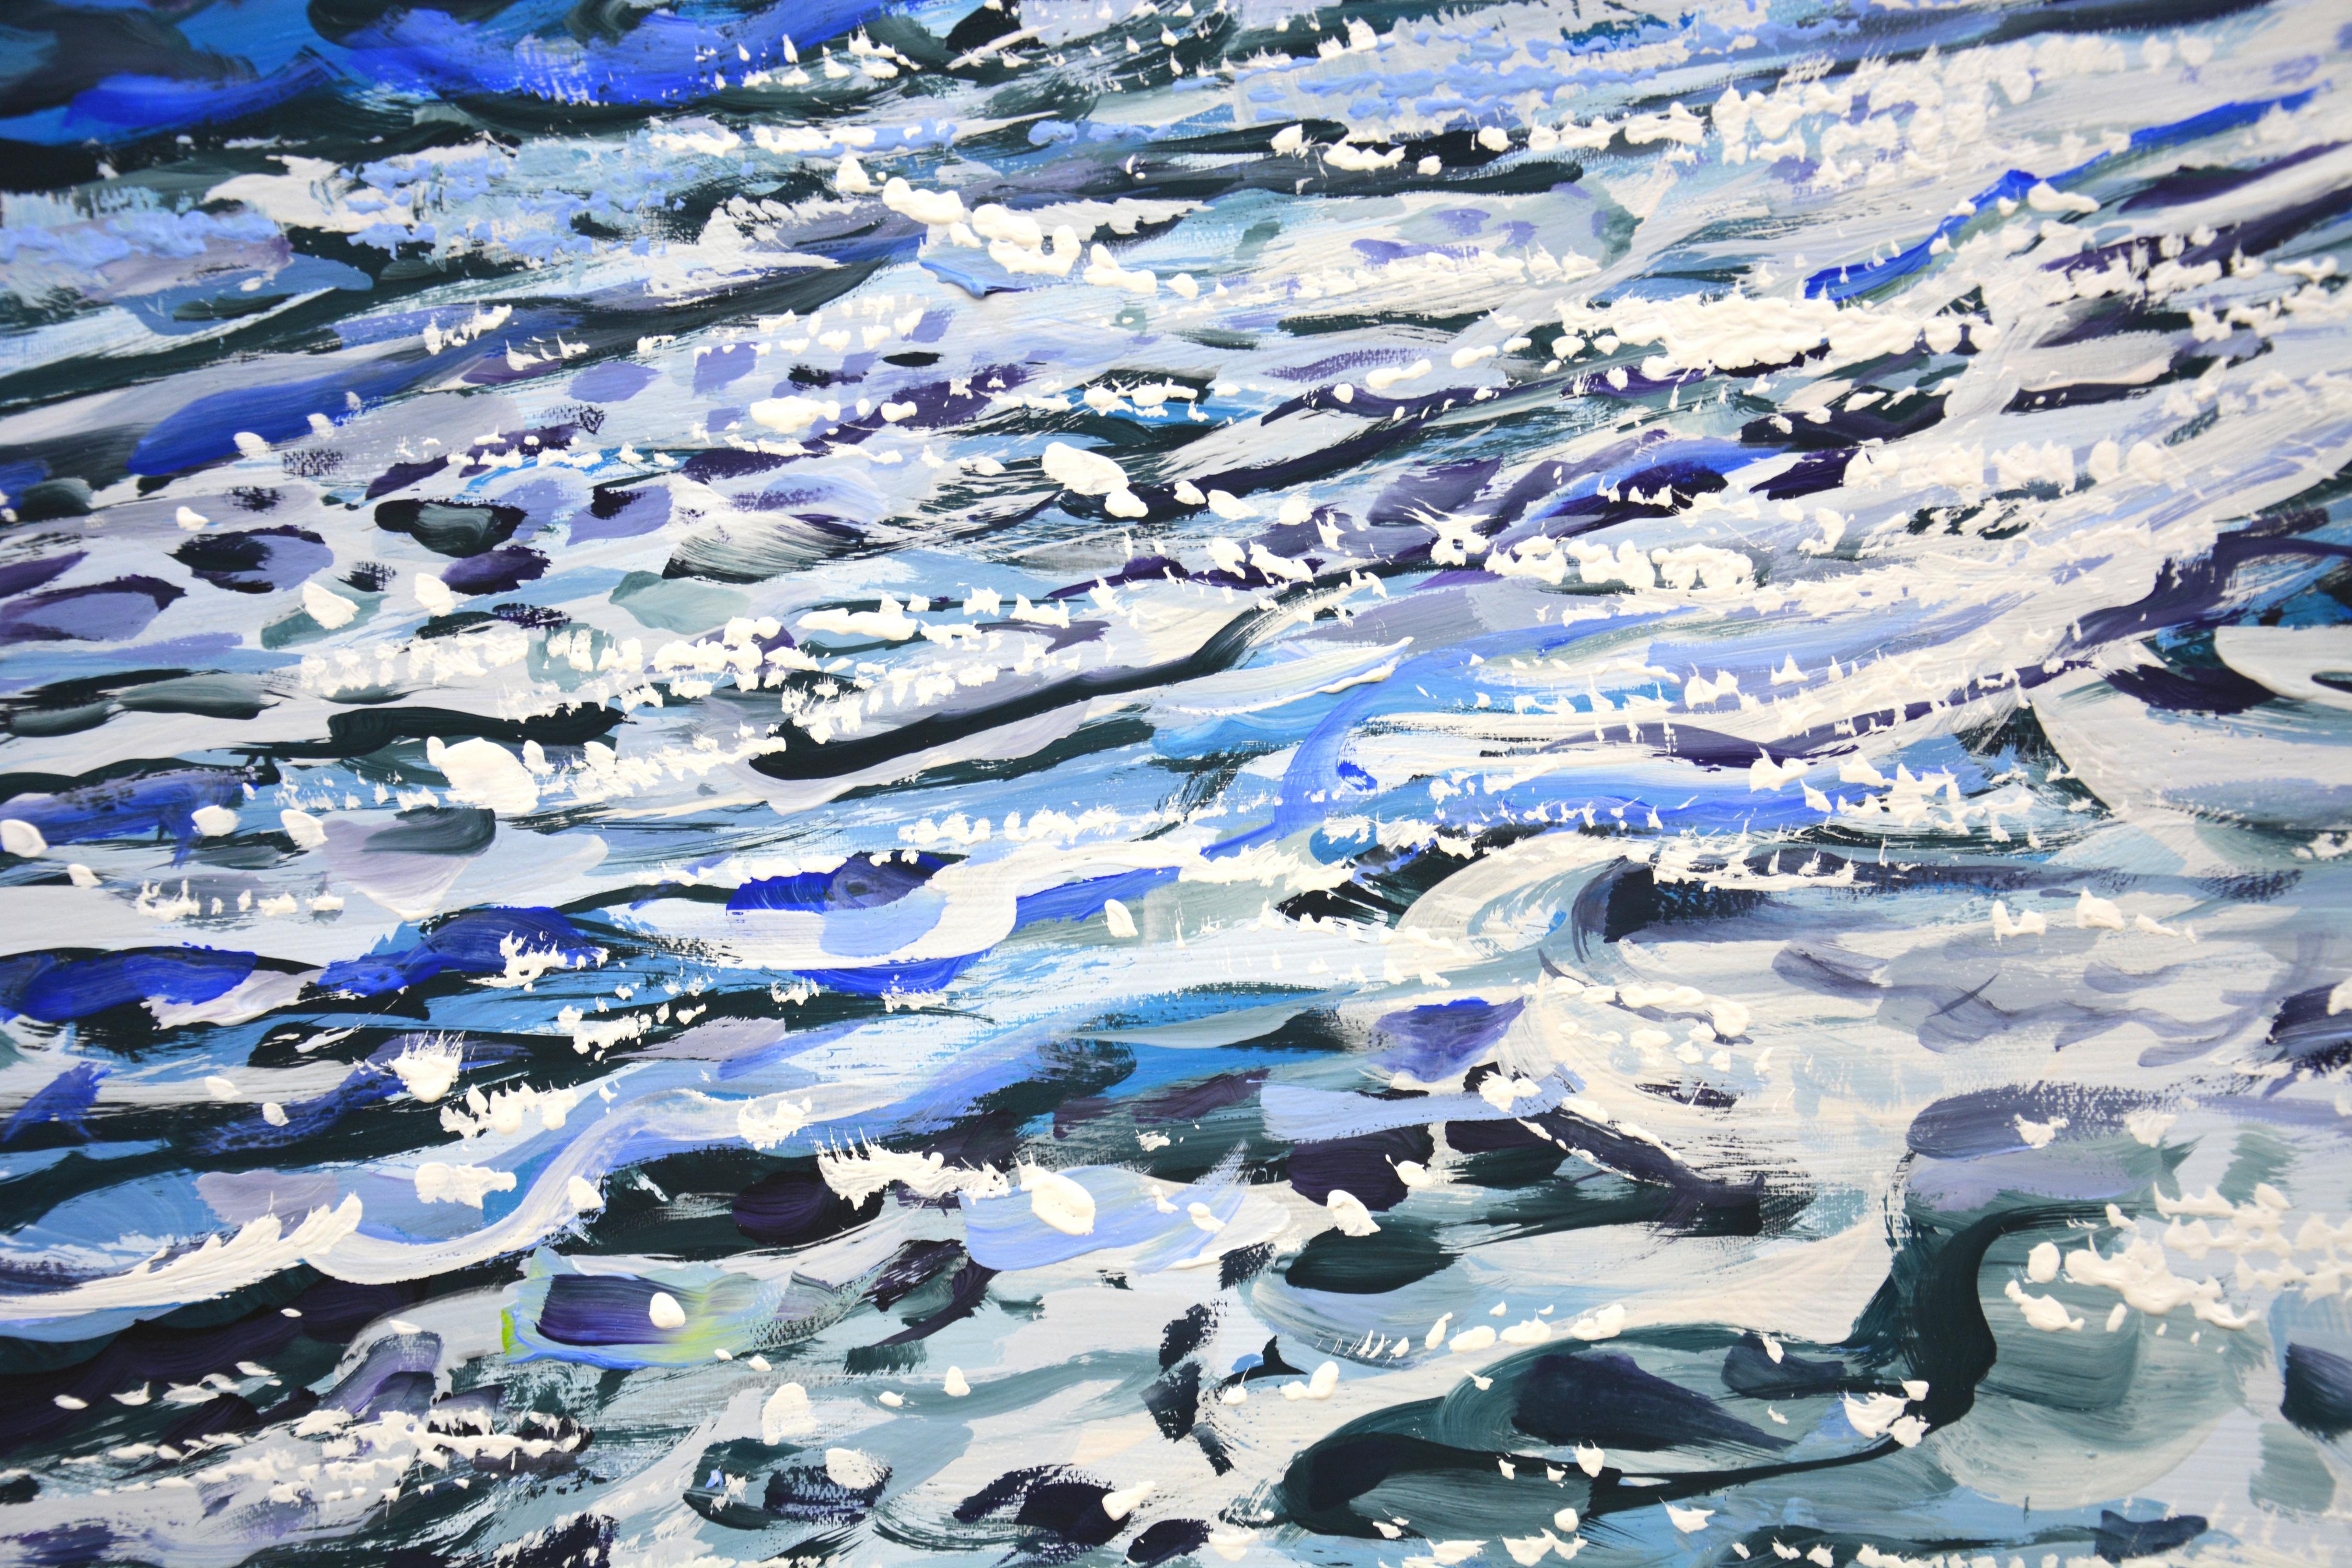 Ocean. Light 100. Summer, seascape: blue water, ocean, shimmering reflections of the sun on the water, clear sky, sea foam, small waves create an atmosphere of relaxation and romance. Made in the style of realism. The silvery-white palette